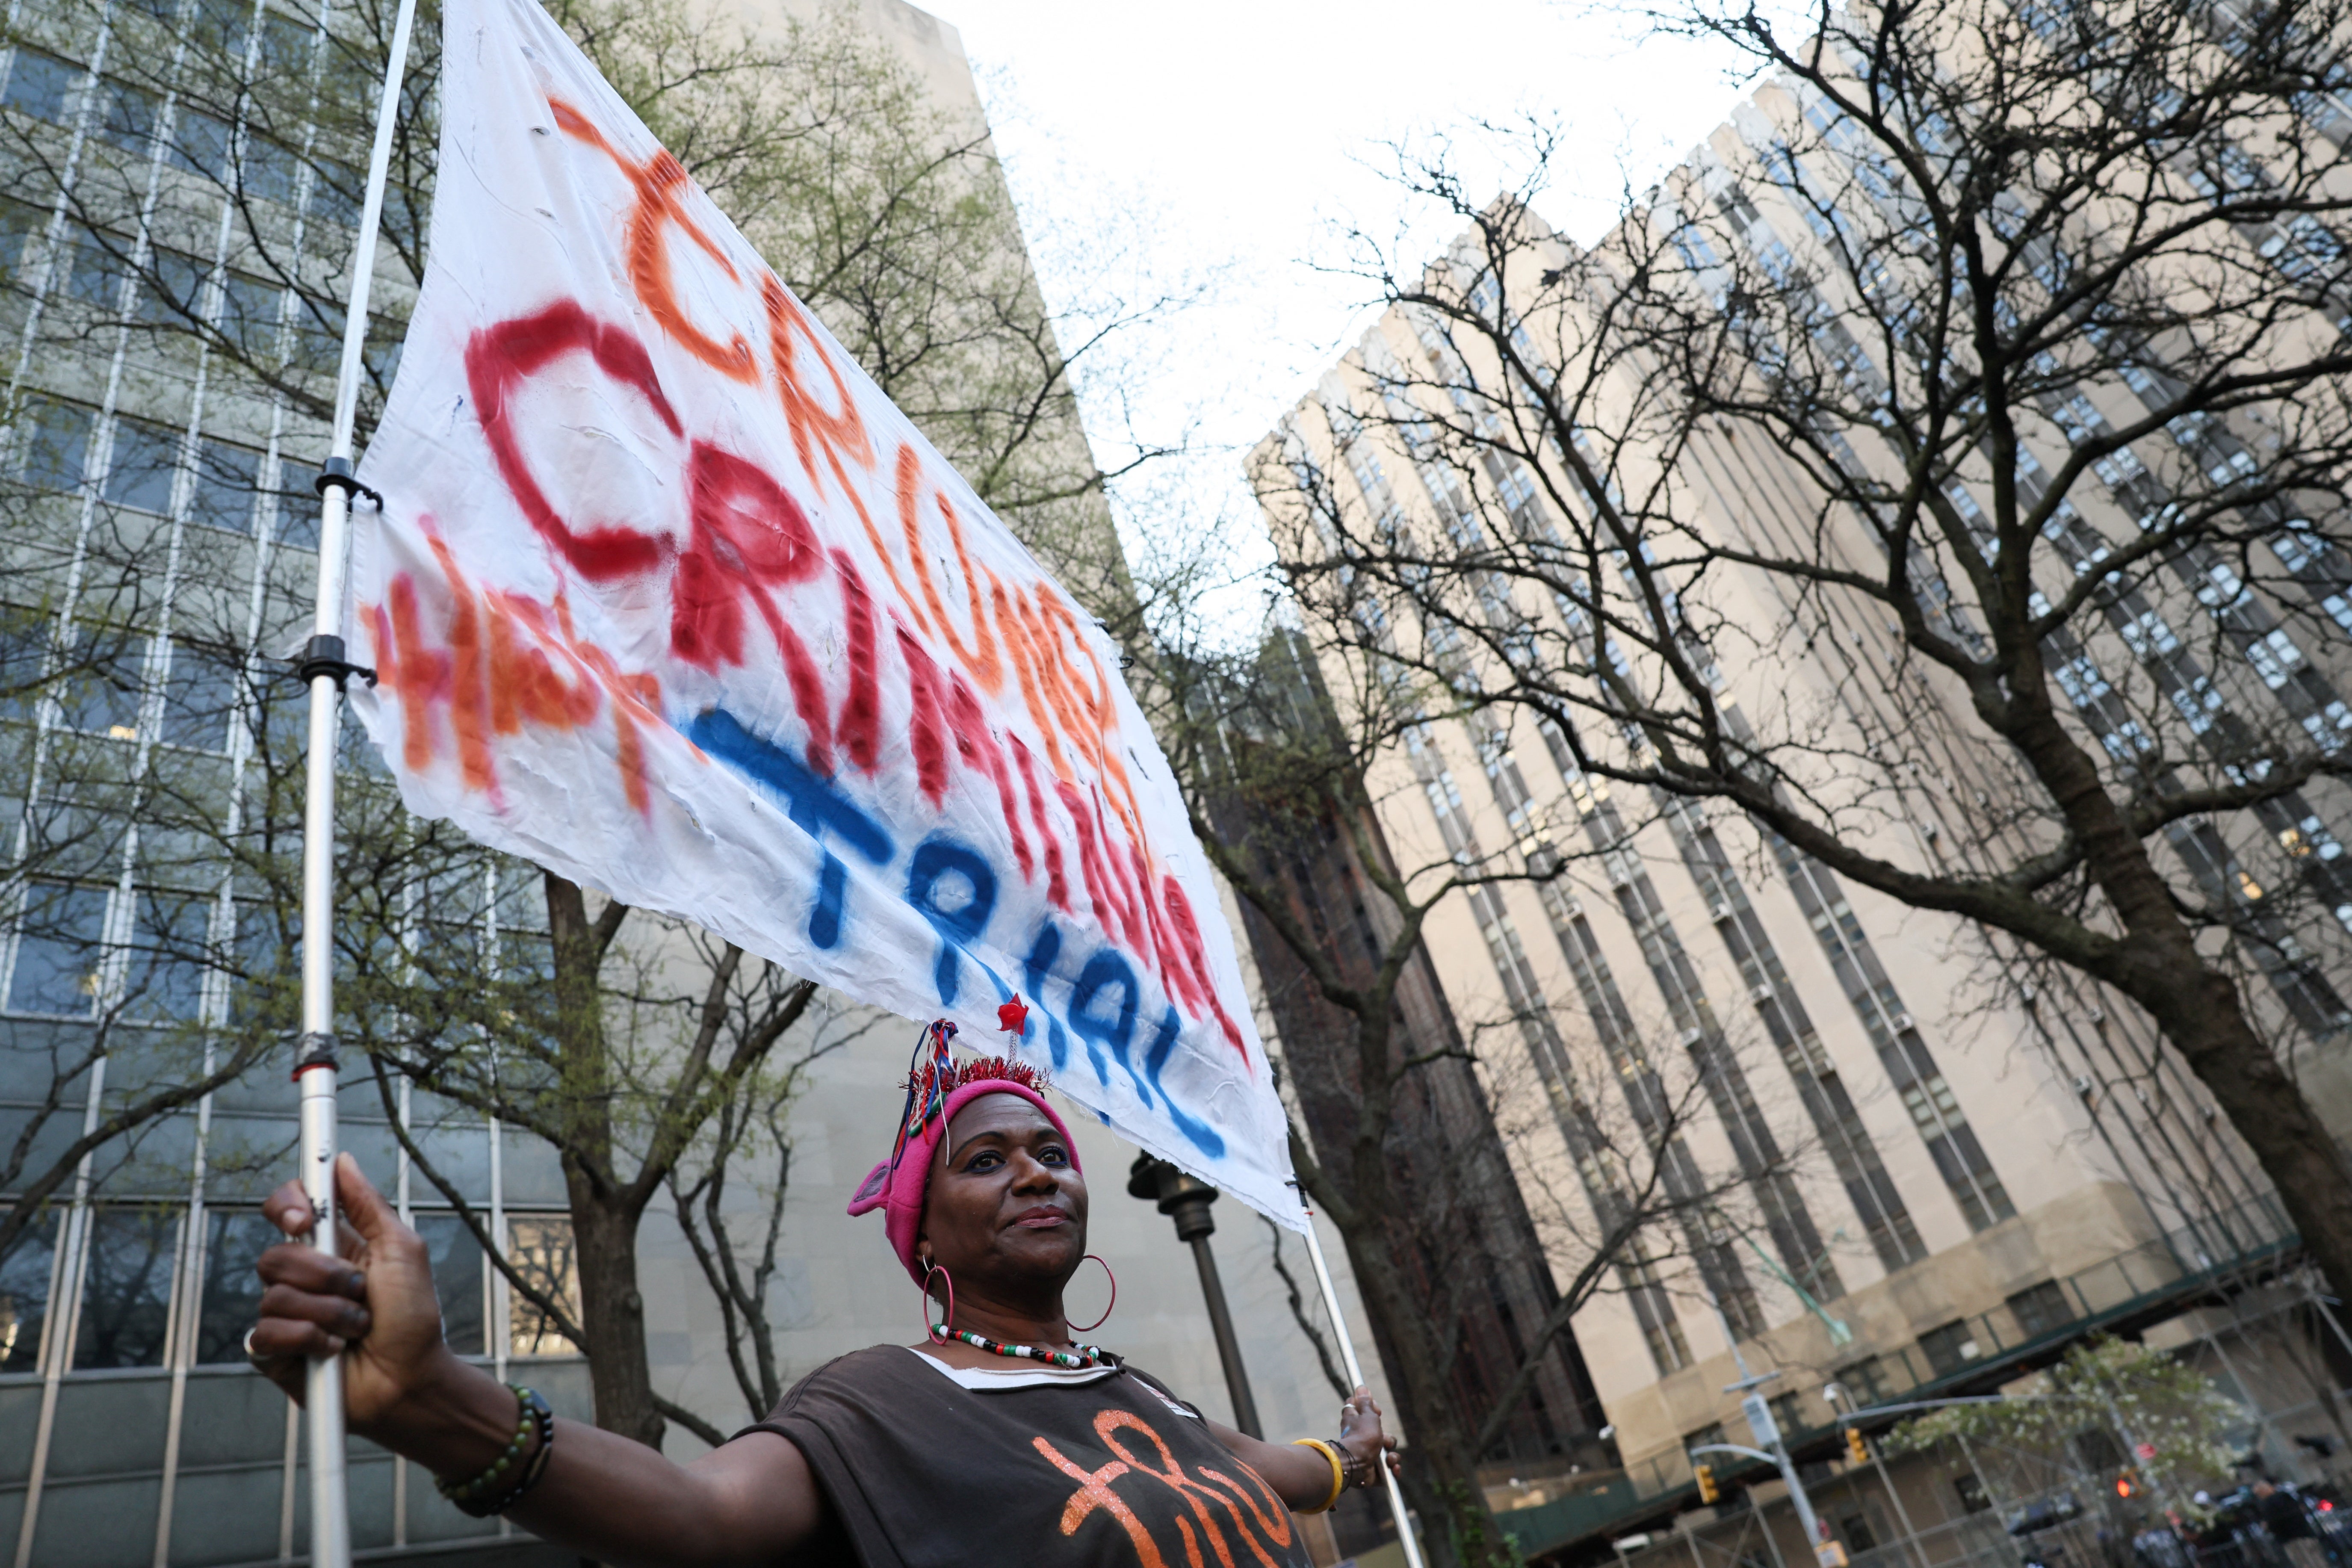 A protester holds a banner against Donald Trump outside the courthouse